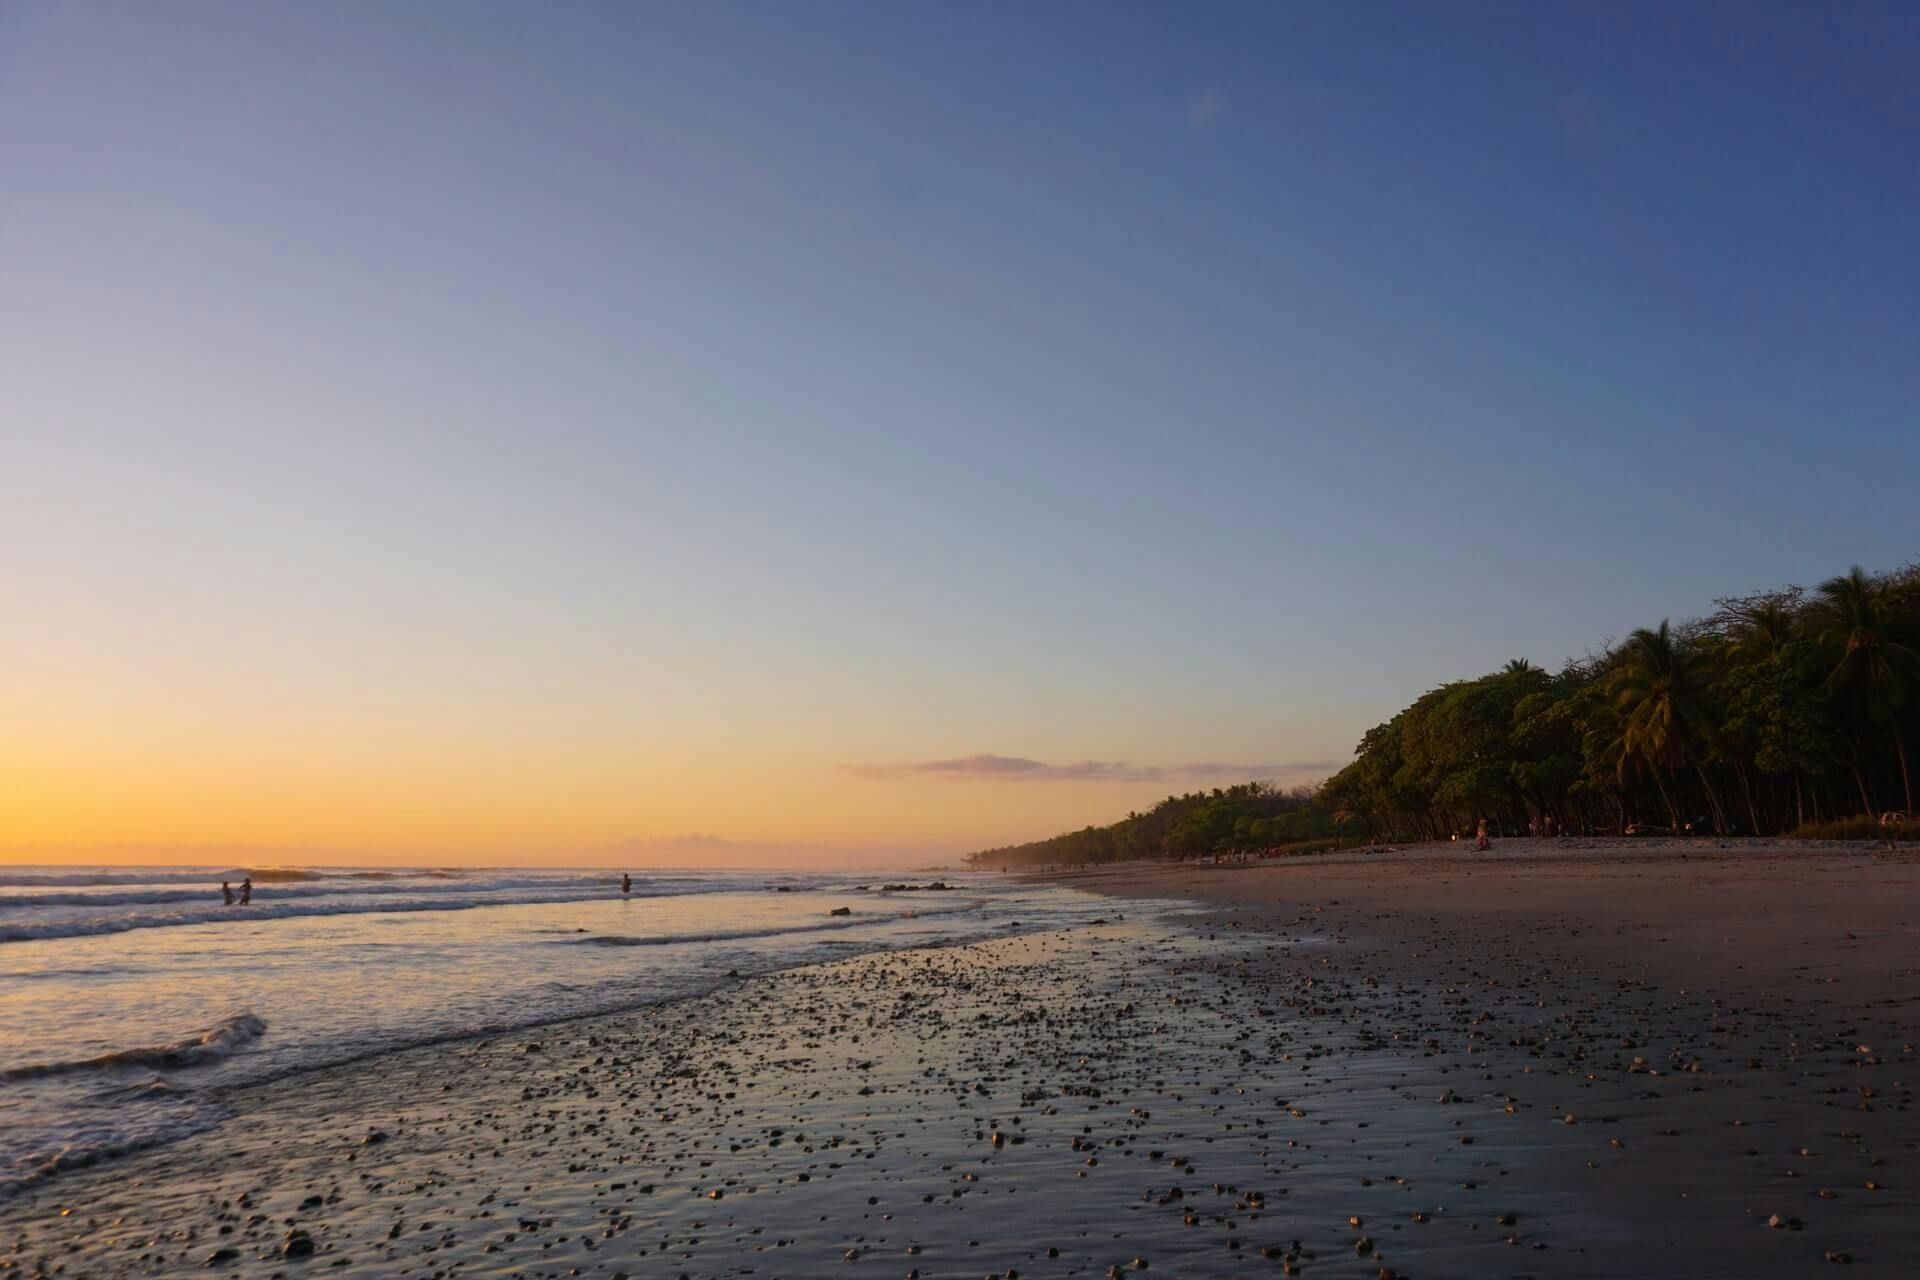 Coworking, Coliving and Surfing in Costa Rica